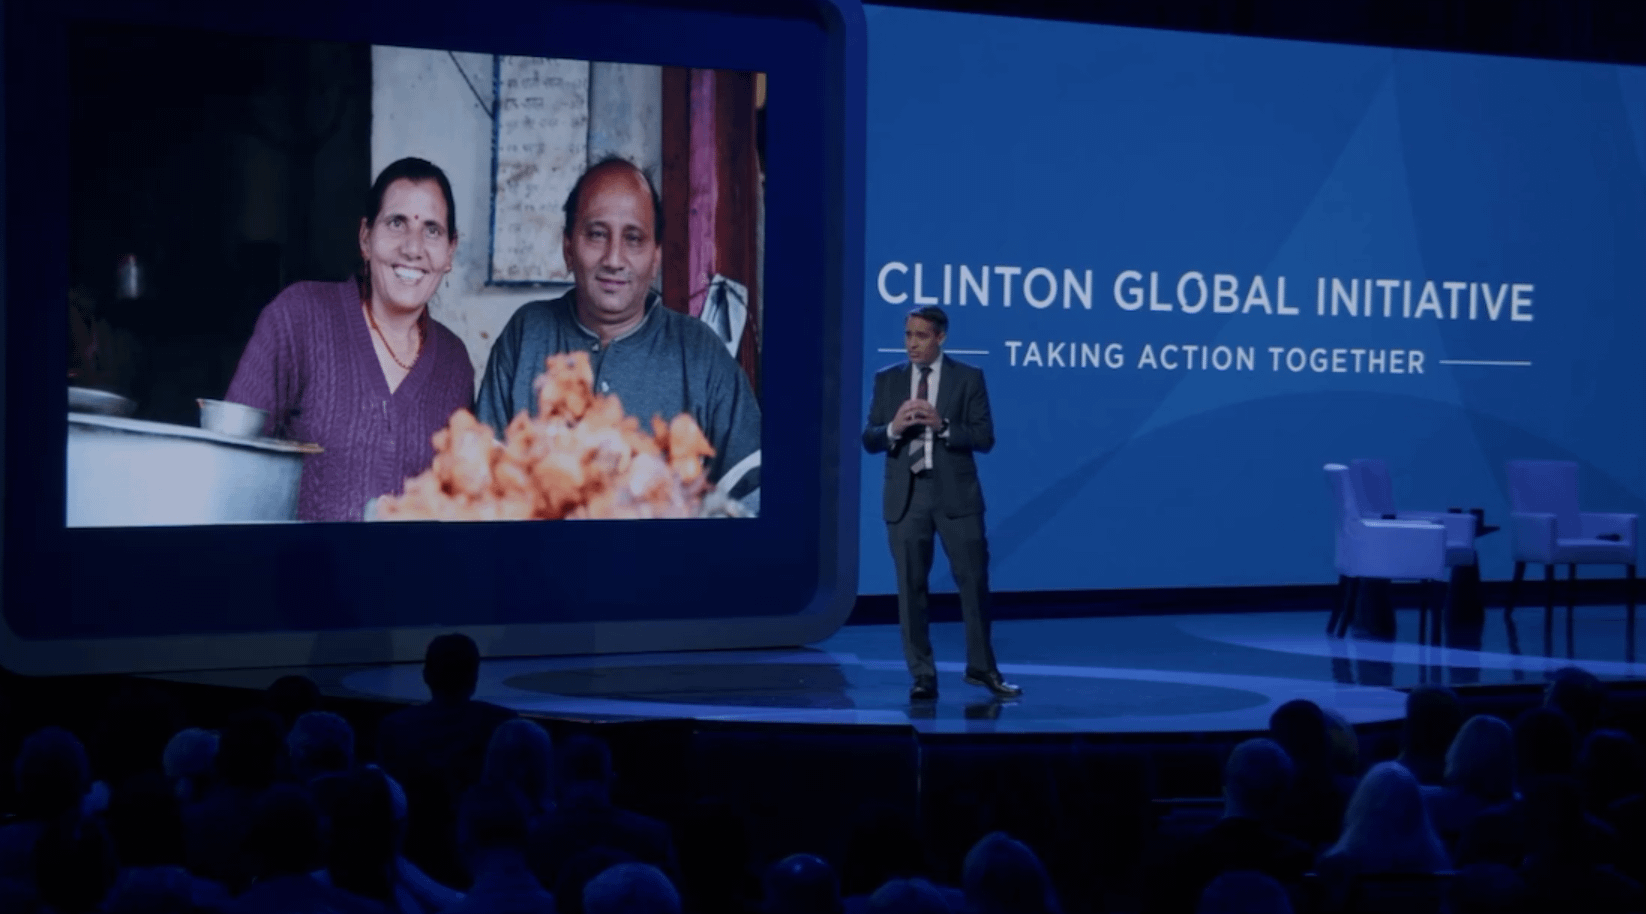 LeapFrog Investments Clinton Global Initiative